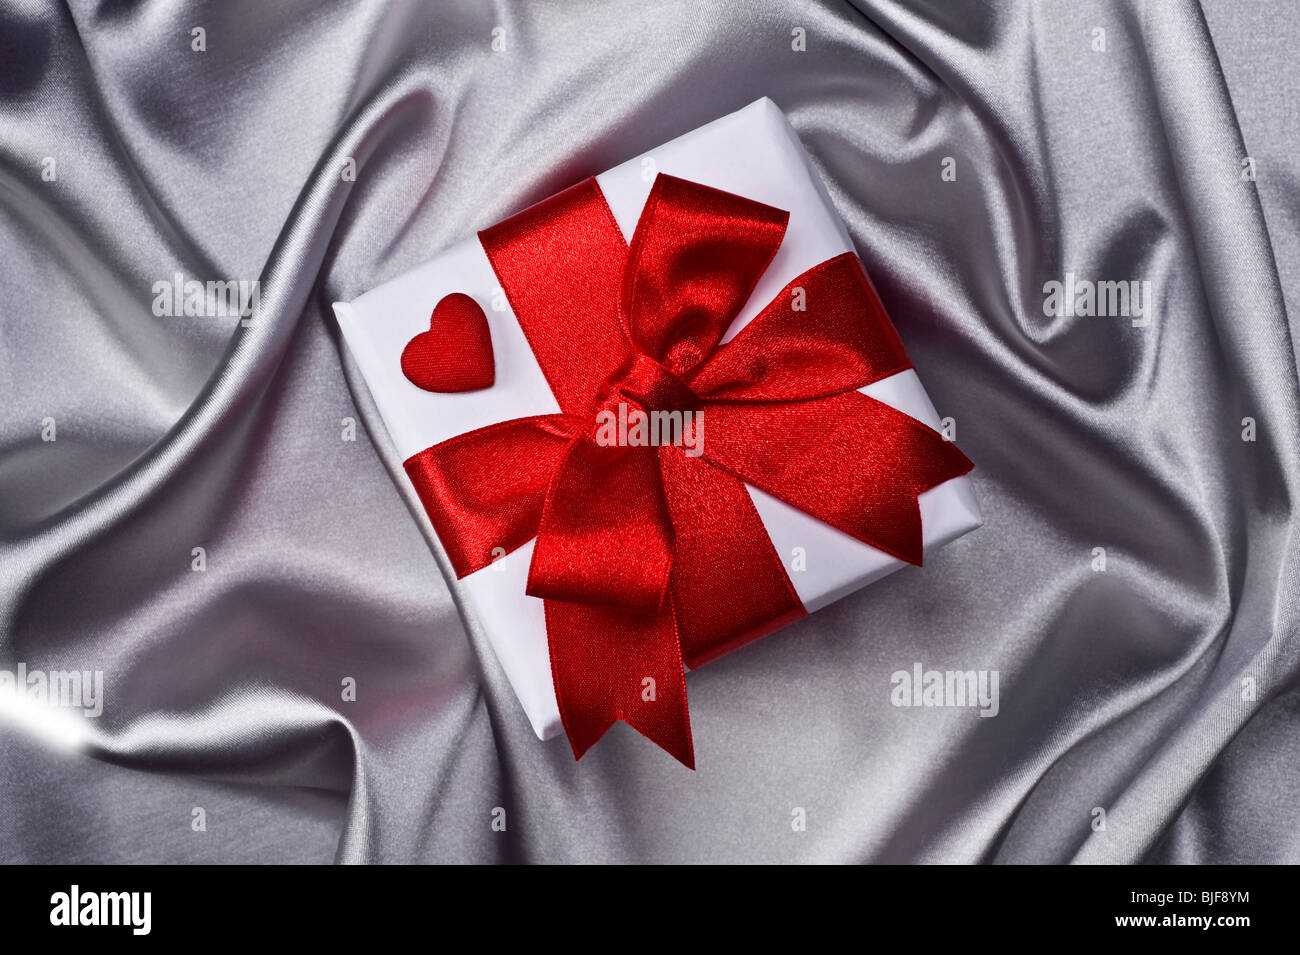 gift with decorative red ribbon on silver background Stock Photo